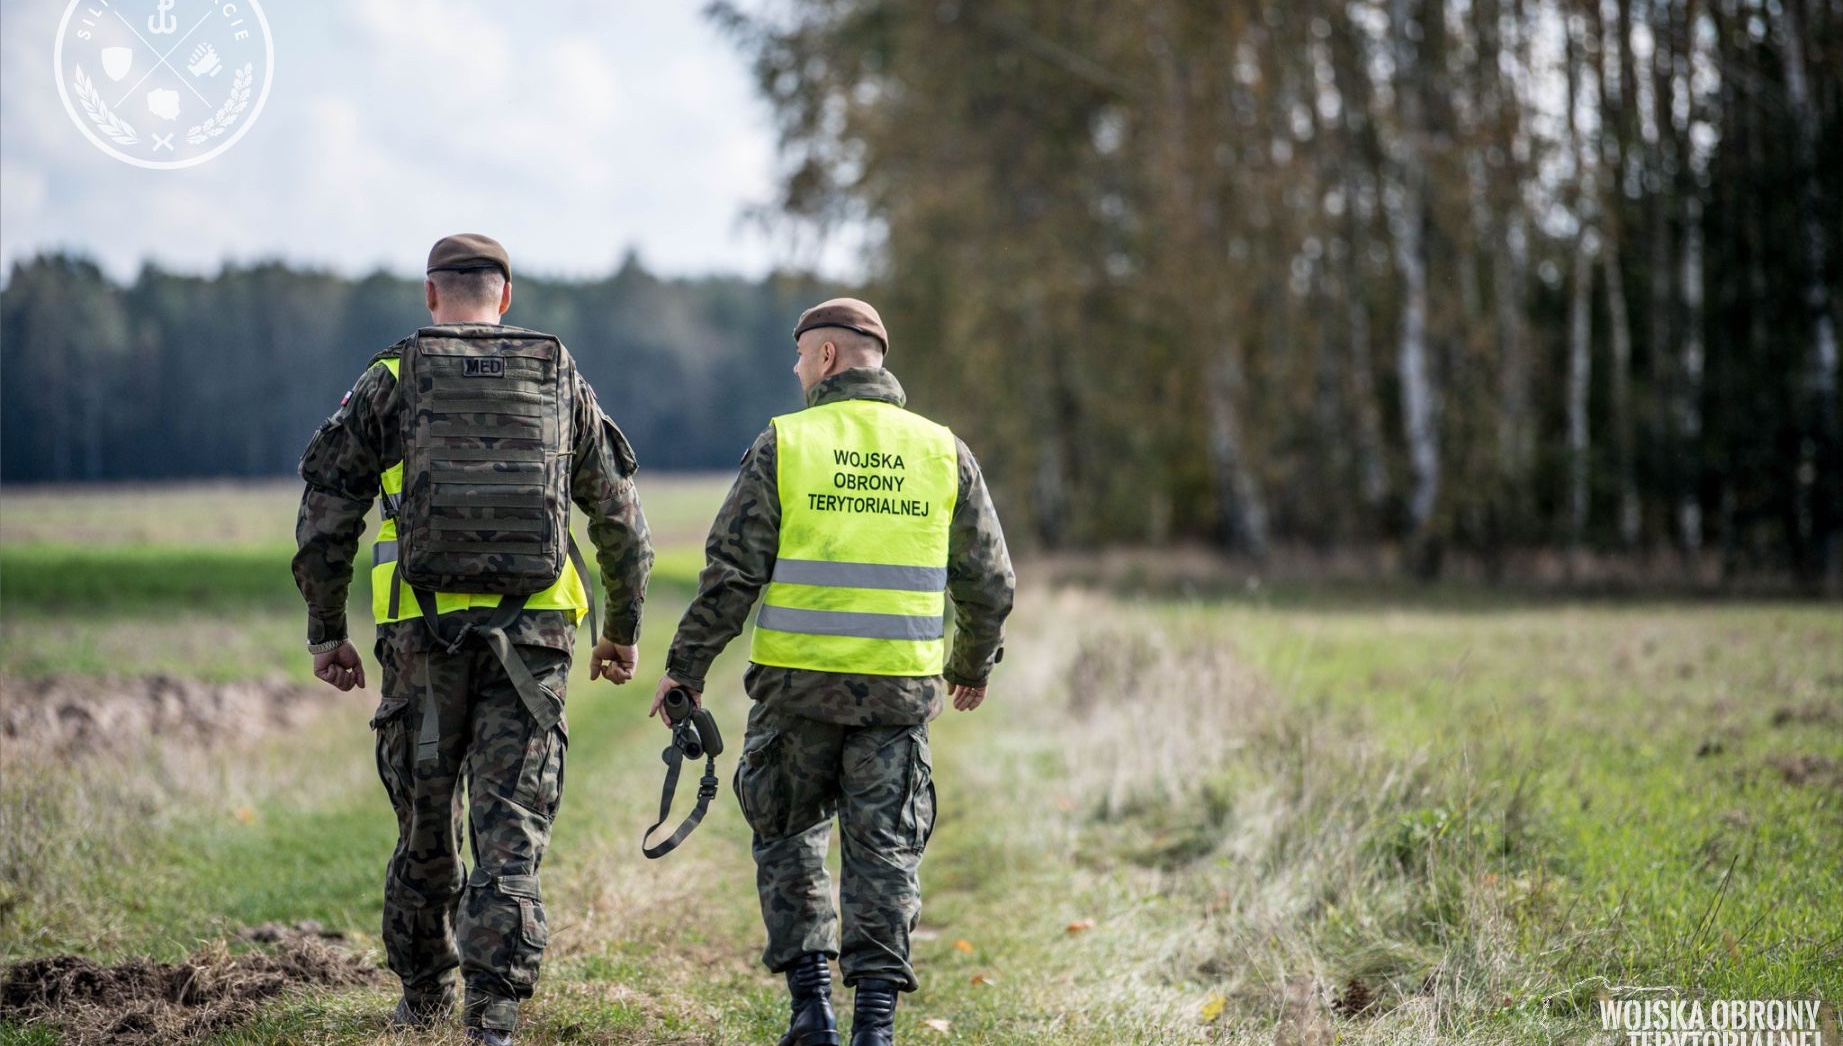 TDF soldiers save the lives of immigrants and protect Polish borders